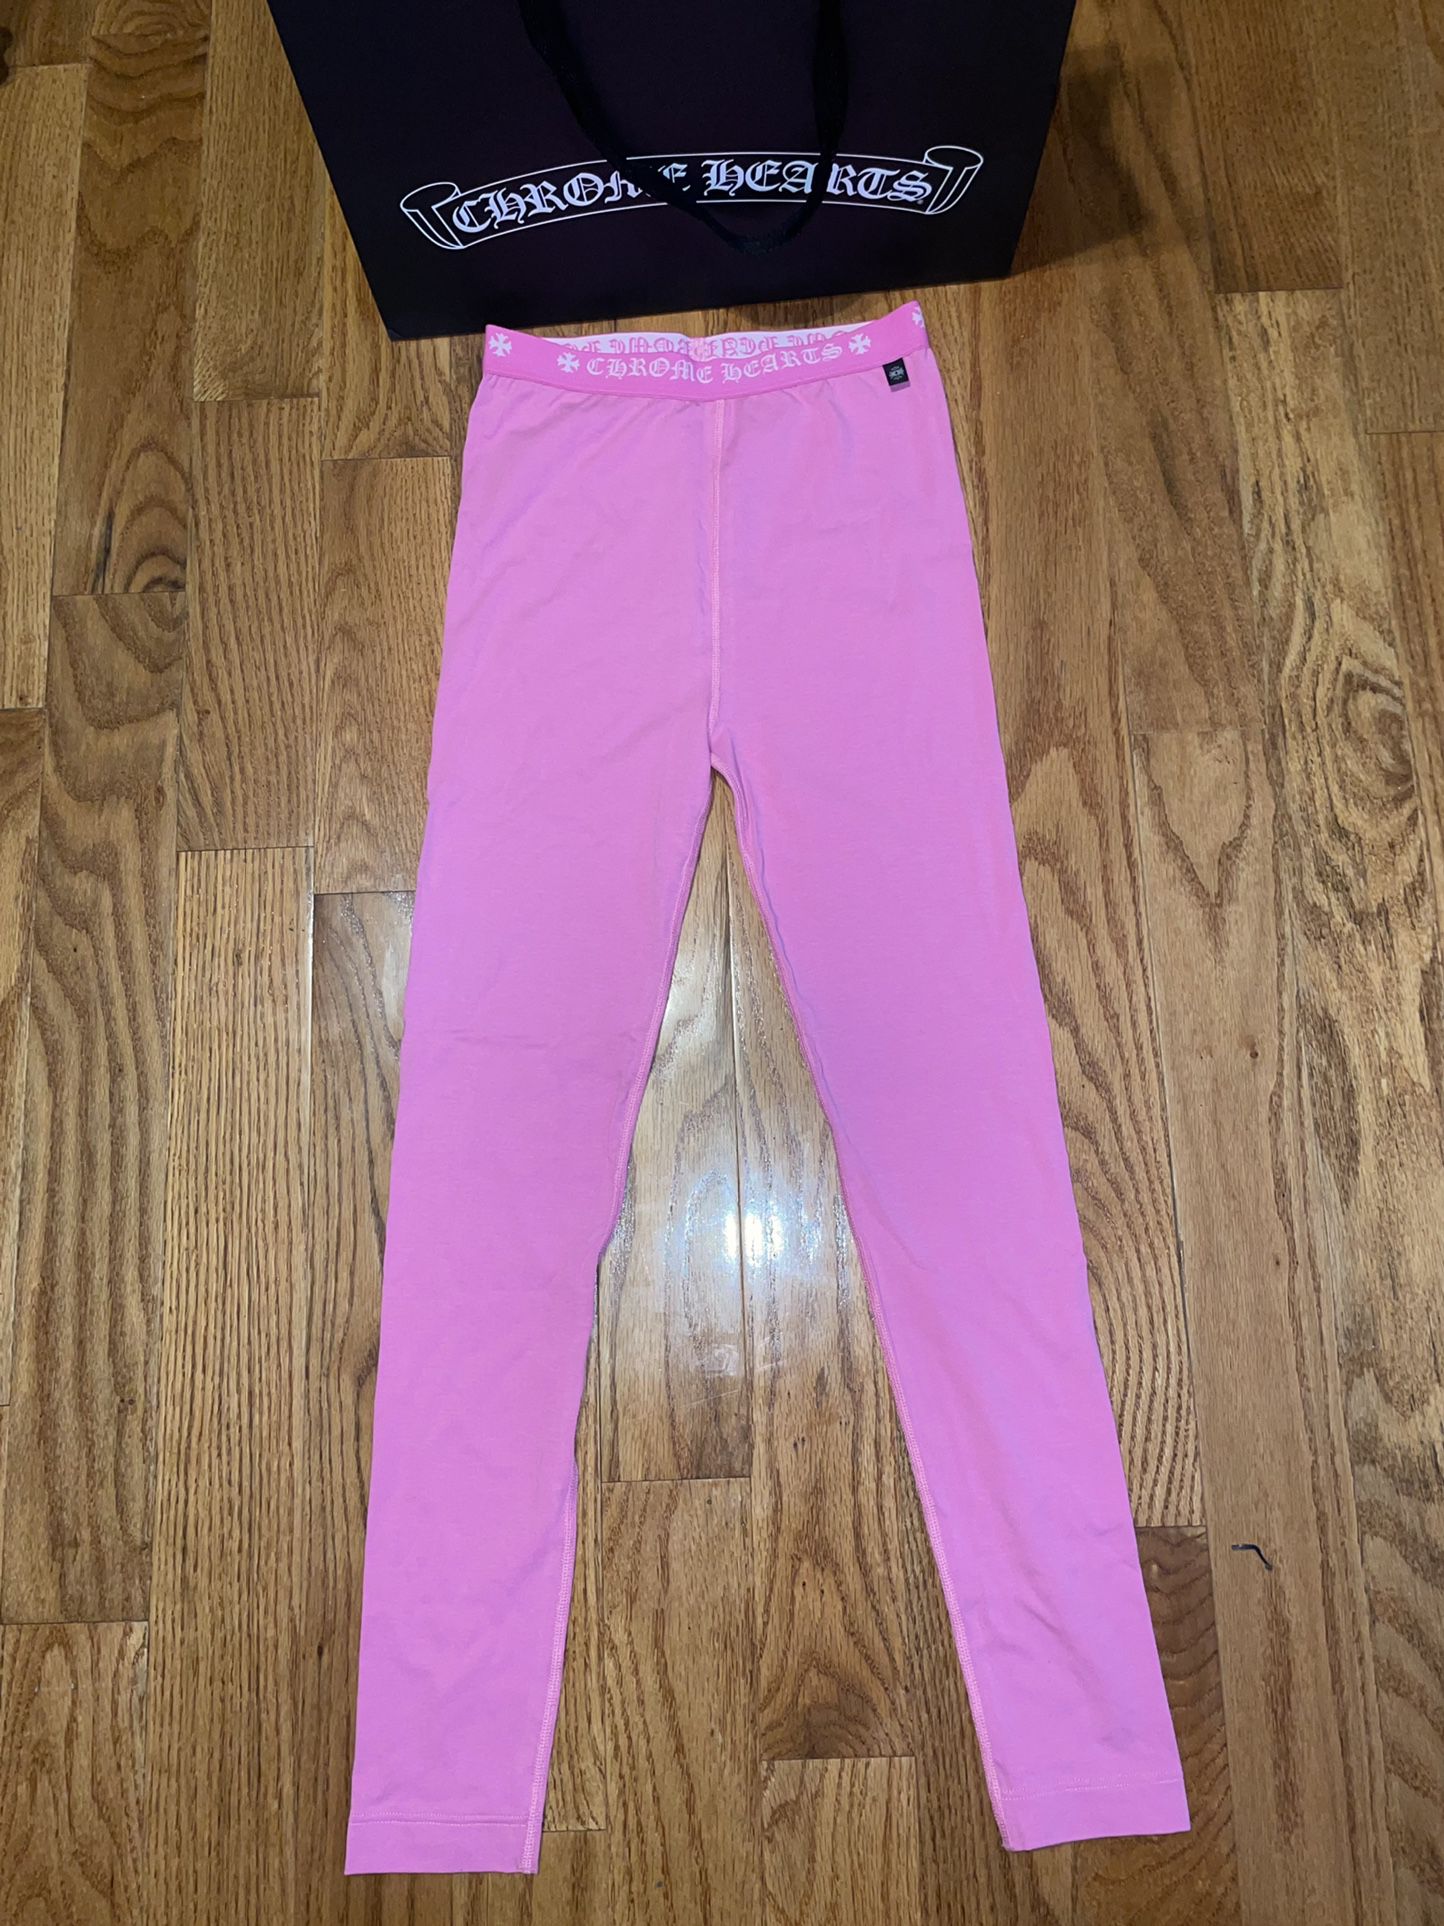 Chrome Hearts Leggings Size Medium for Sale in Mount Vernon, NY - OfferUp